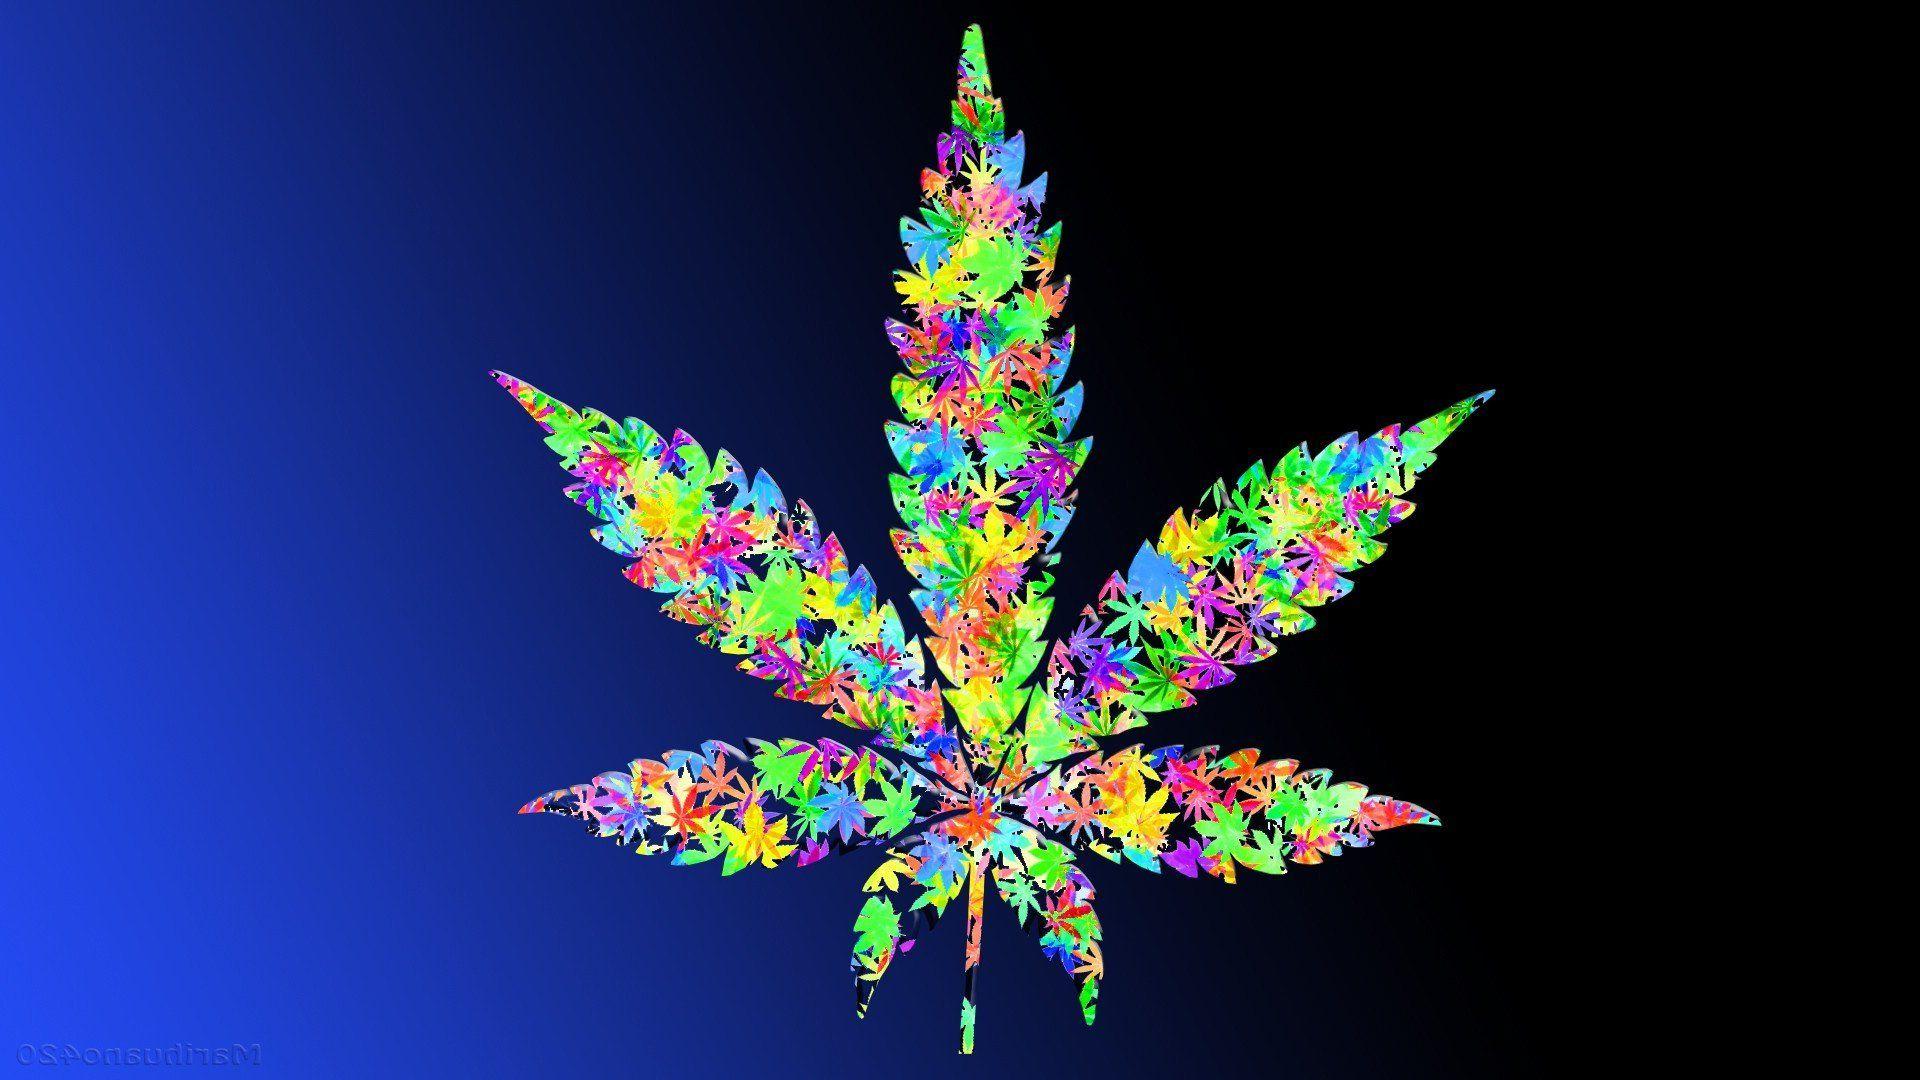 HD Weed Widescreen 1080P Wallpapers - Top Free HD Weed Widescreen 1080P ...